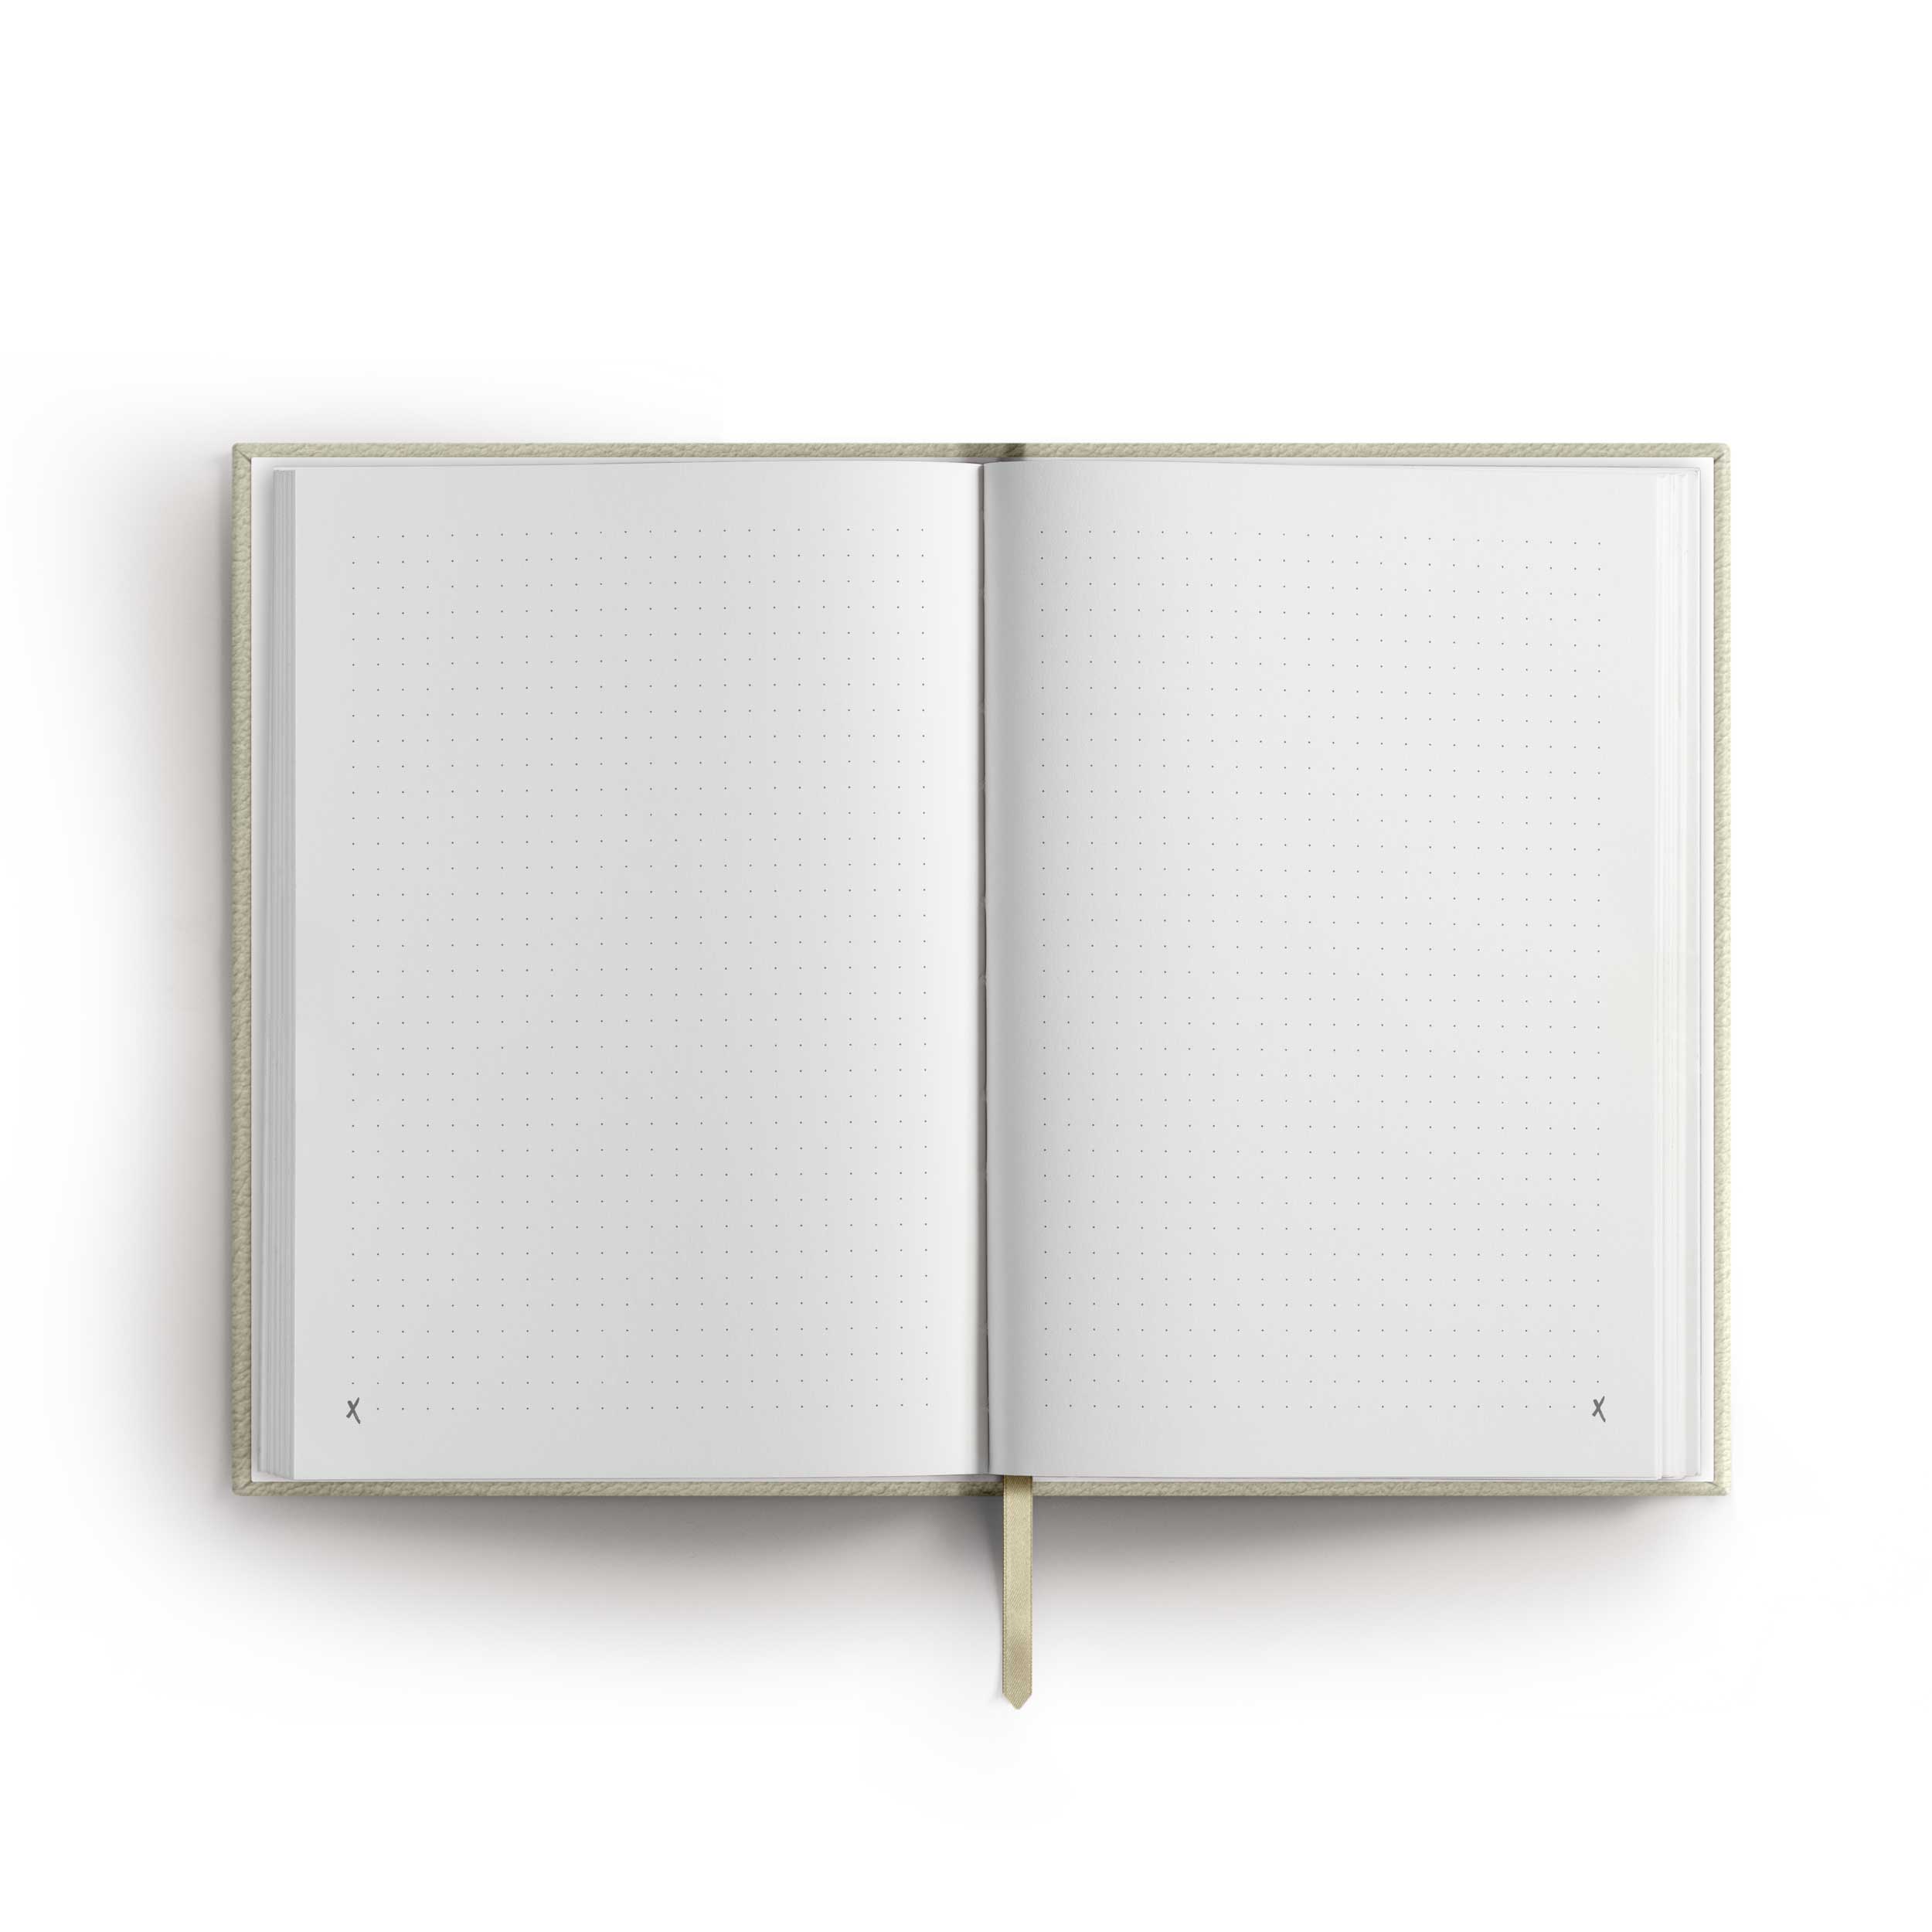 Notebook "Killer Ideas", A5, Cream / Gold, faux leather